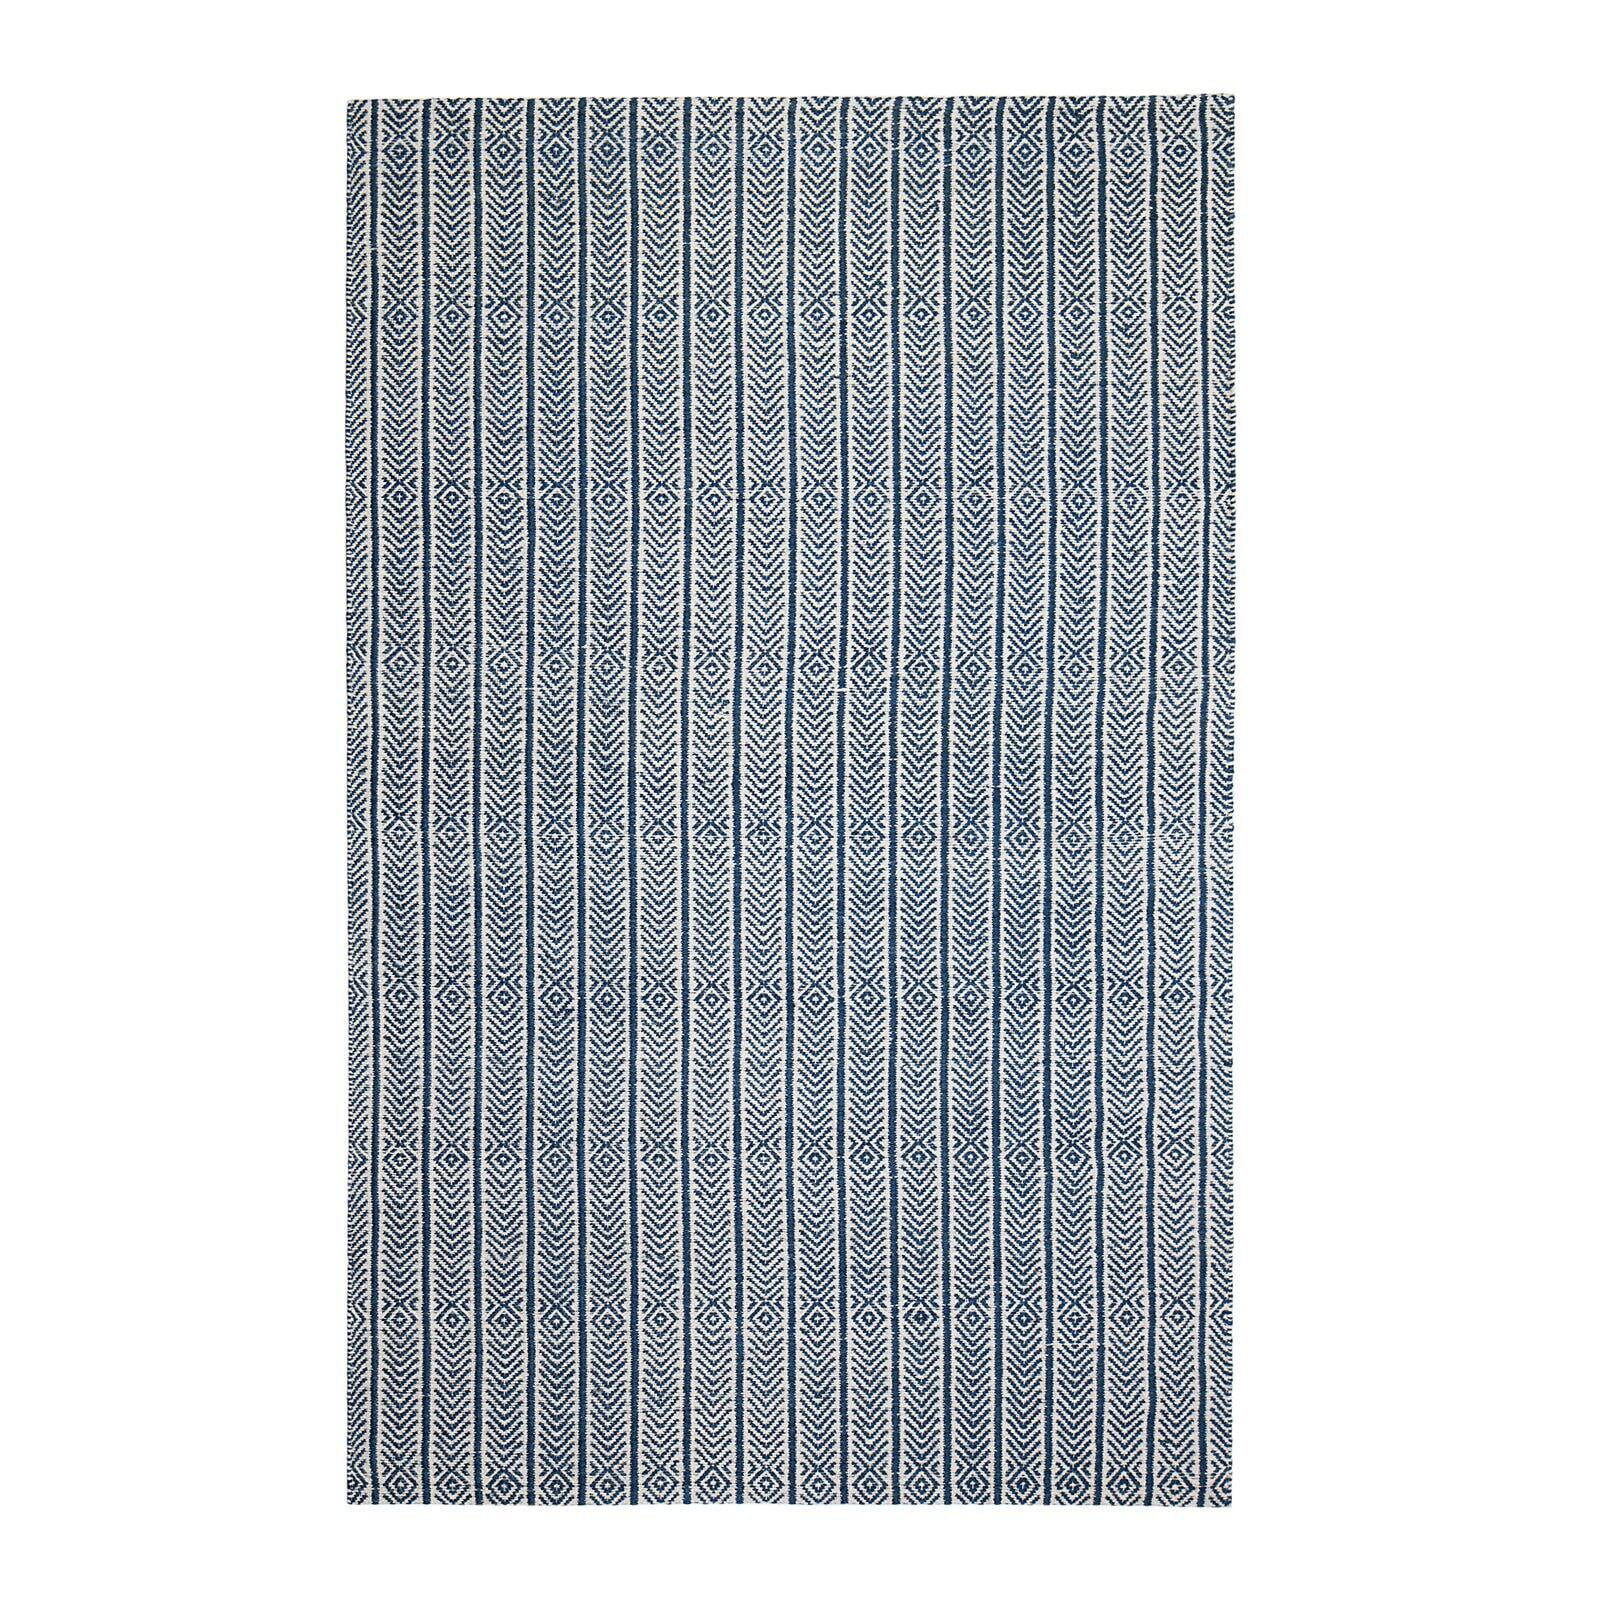 Picture of Anji Mountain AMB0382-0057 5 x 7 ft. Ash Rectangular Rug - Gray, Ivory